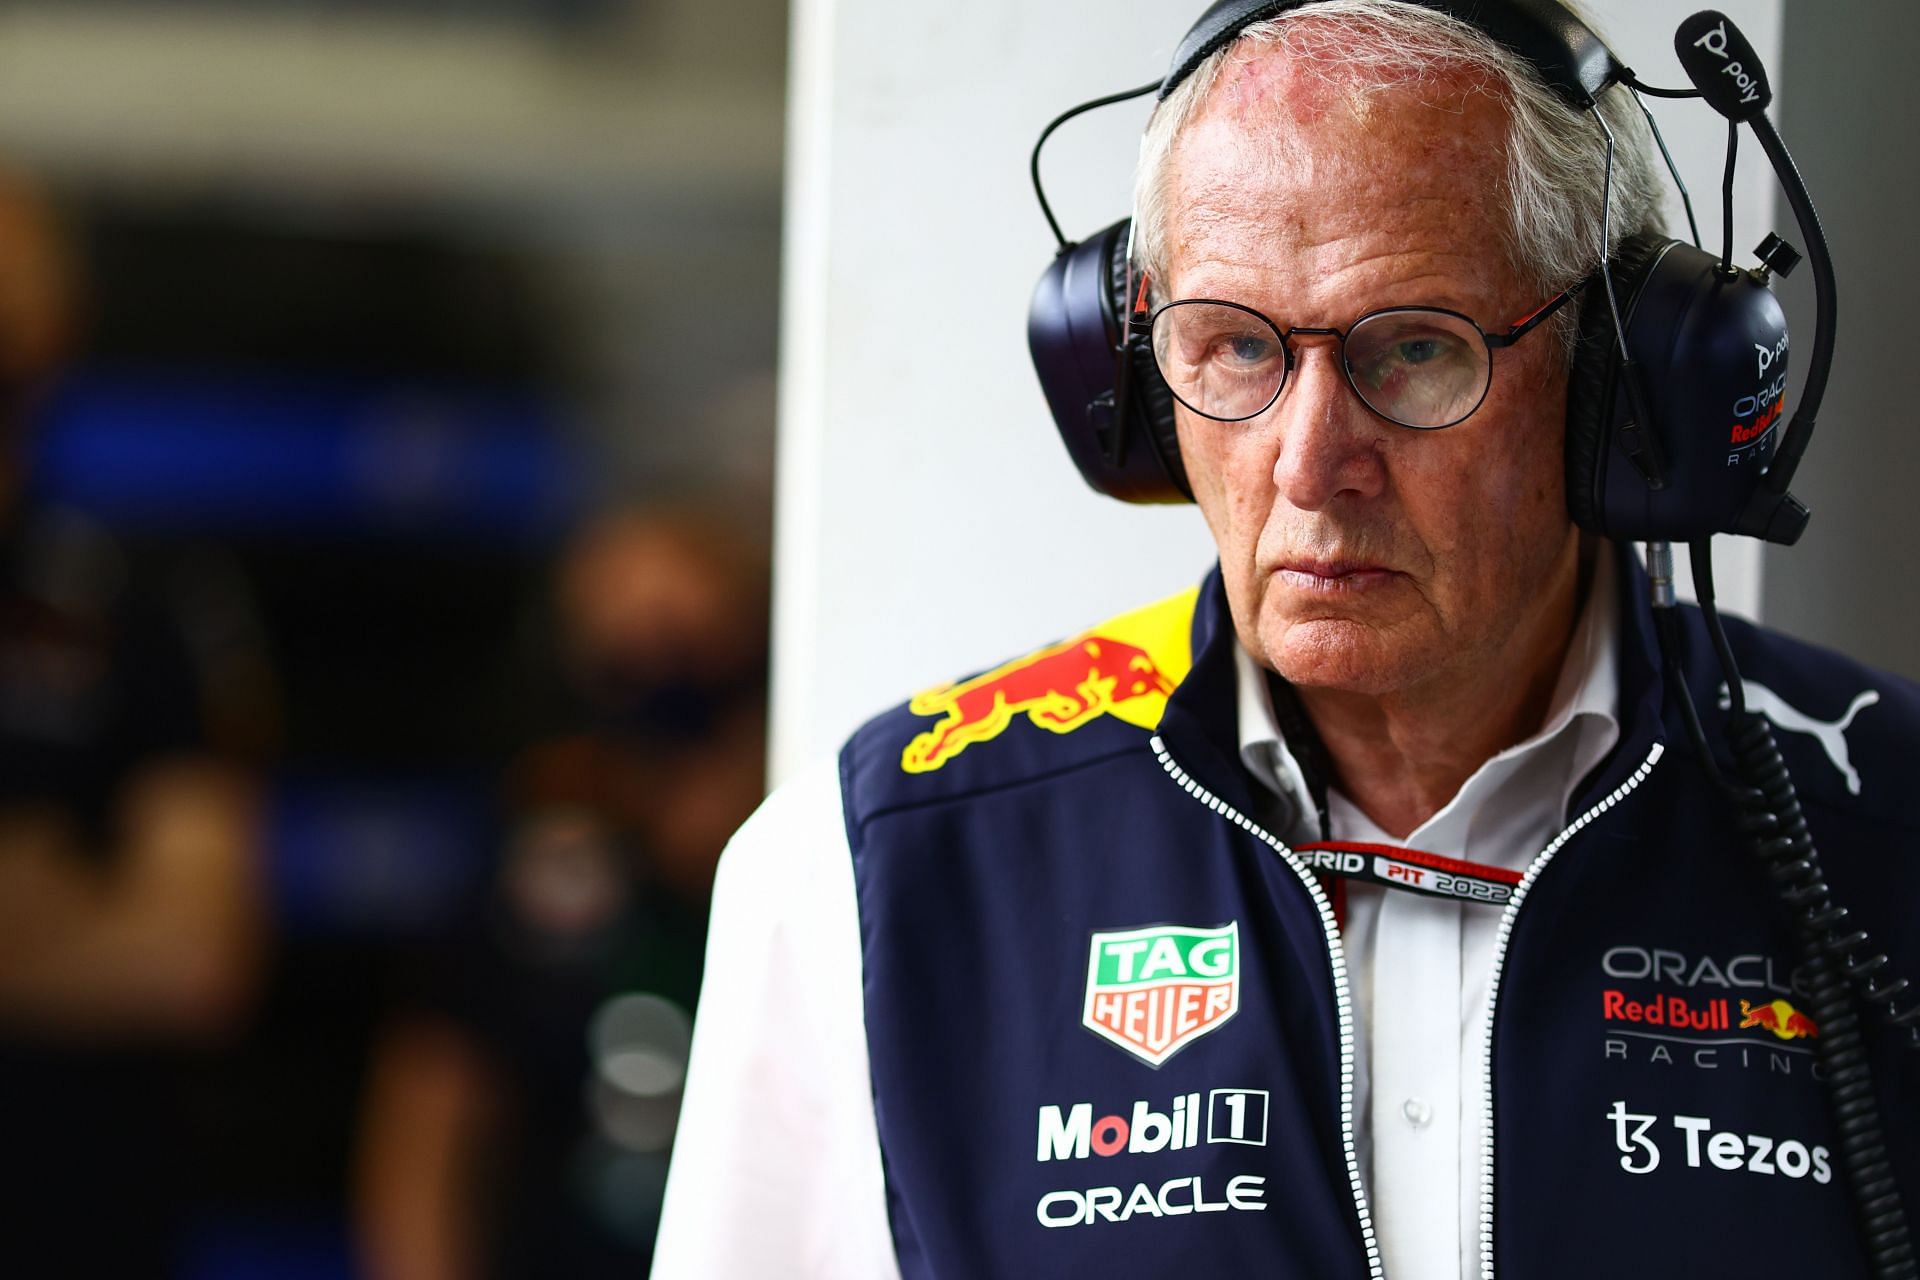 Red Bull Racing Team Consultant Dr Helmut Marko looks on in the garage during qualifying ahead of the F1 Grand Prix of Saudi Arabia at the Jeddah Corniche Circuit on March 26, 2022 in Jeddah, Saudi Arabia. (Photo by Mark Thompson/Getty Images)